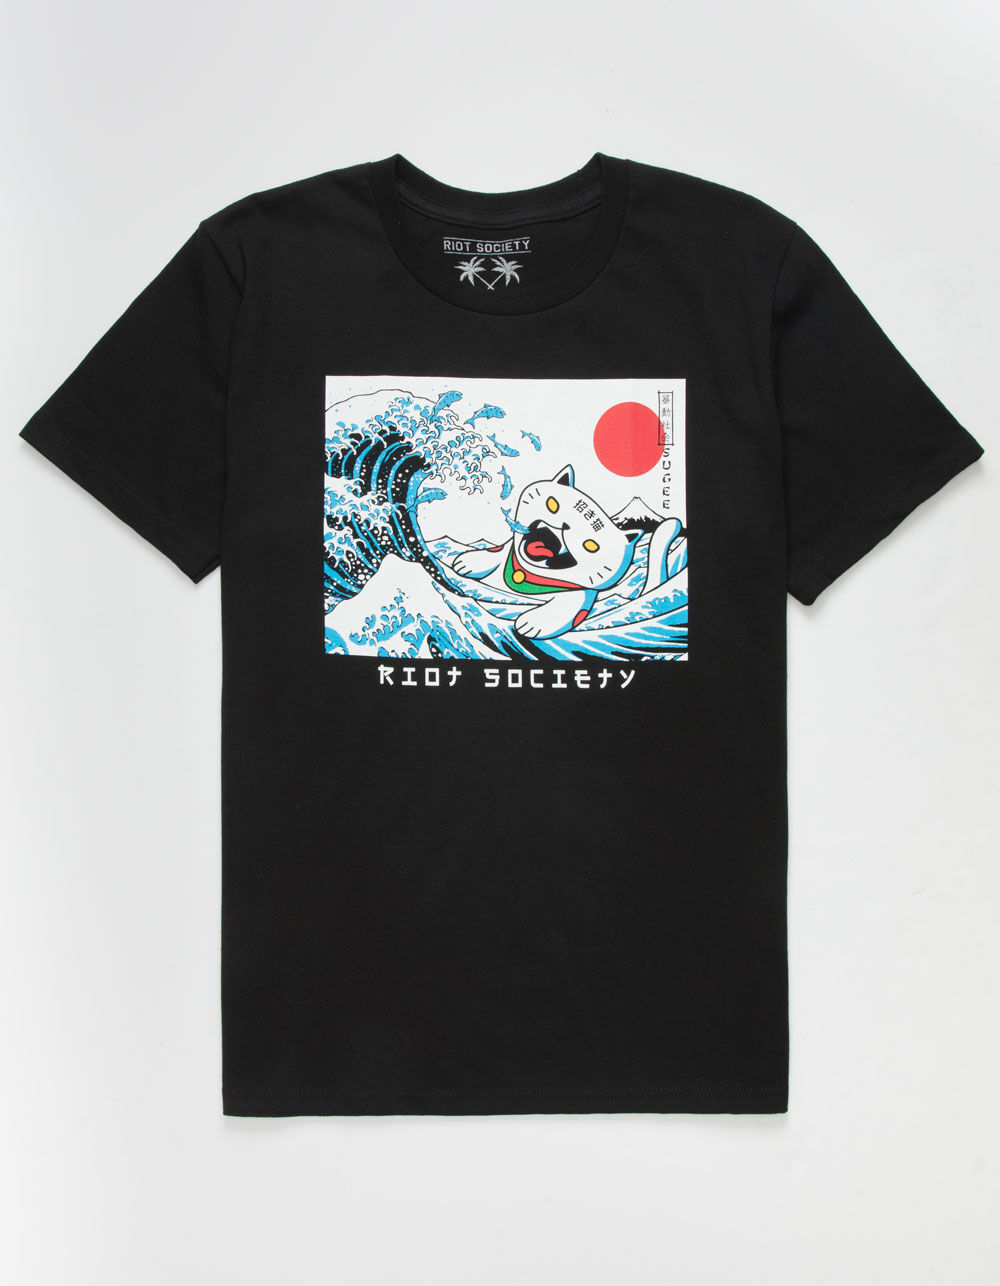 RIOT SOCIETY x Sugee Wave Boys T-Shirt - BLACK | Tillys